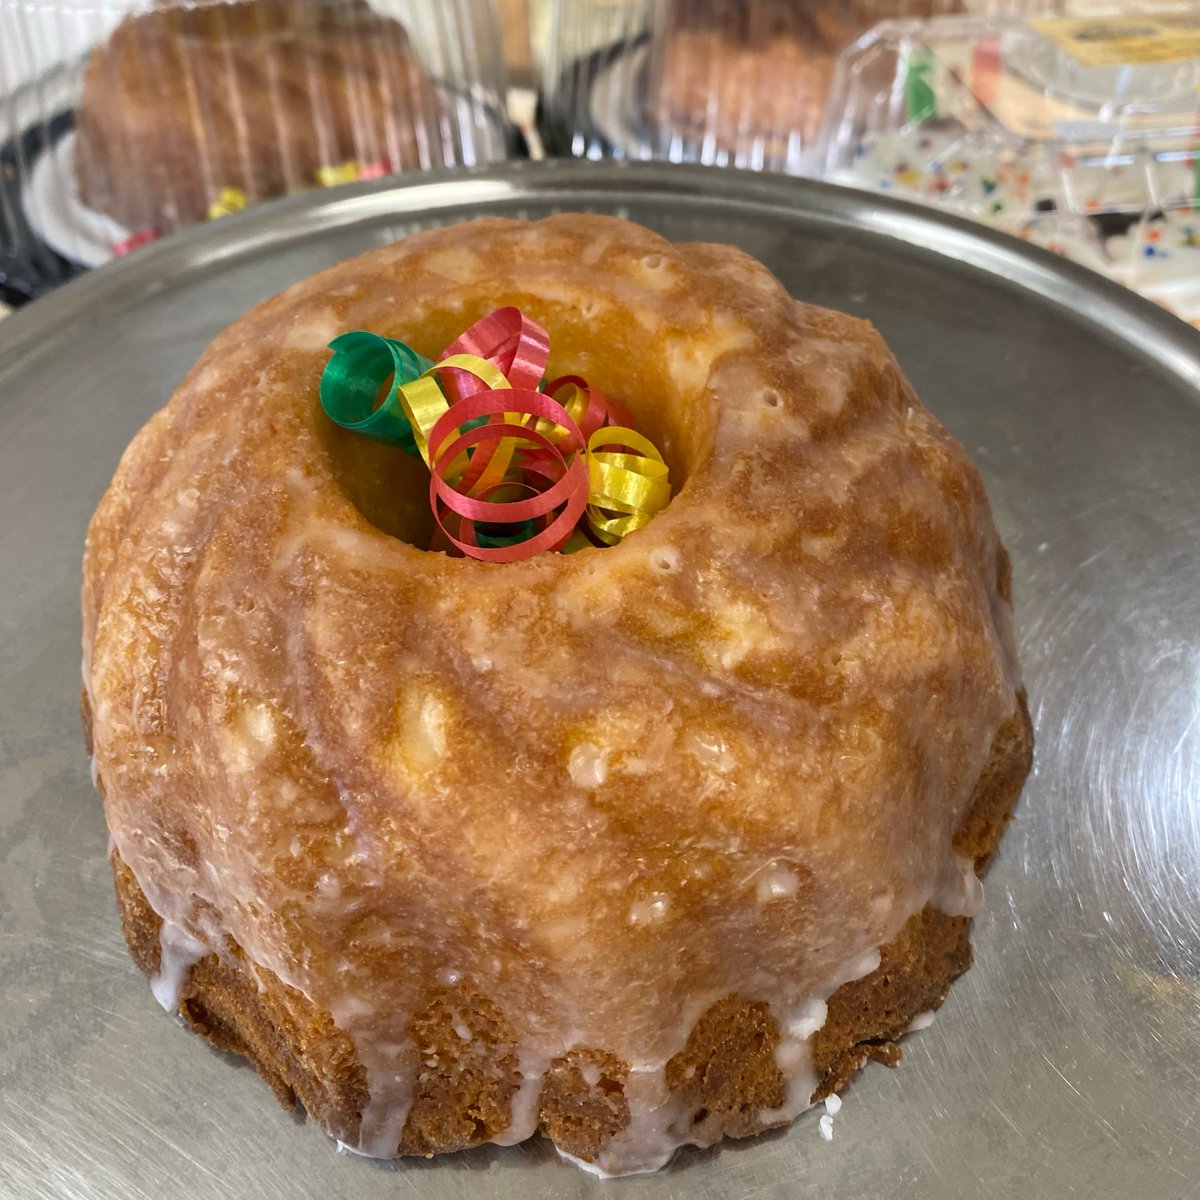 Fiesta Bundt Cake on feature this week! 
Moist cake with orange and pineapple, topped with butter crunch and glaze!
Stop by for a yummy sample!
#pastries #cookies #cakes #bundtcake #featureoftheweek
#florissant #bakery #familyowned #helferspastries